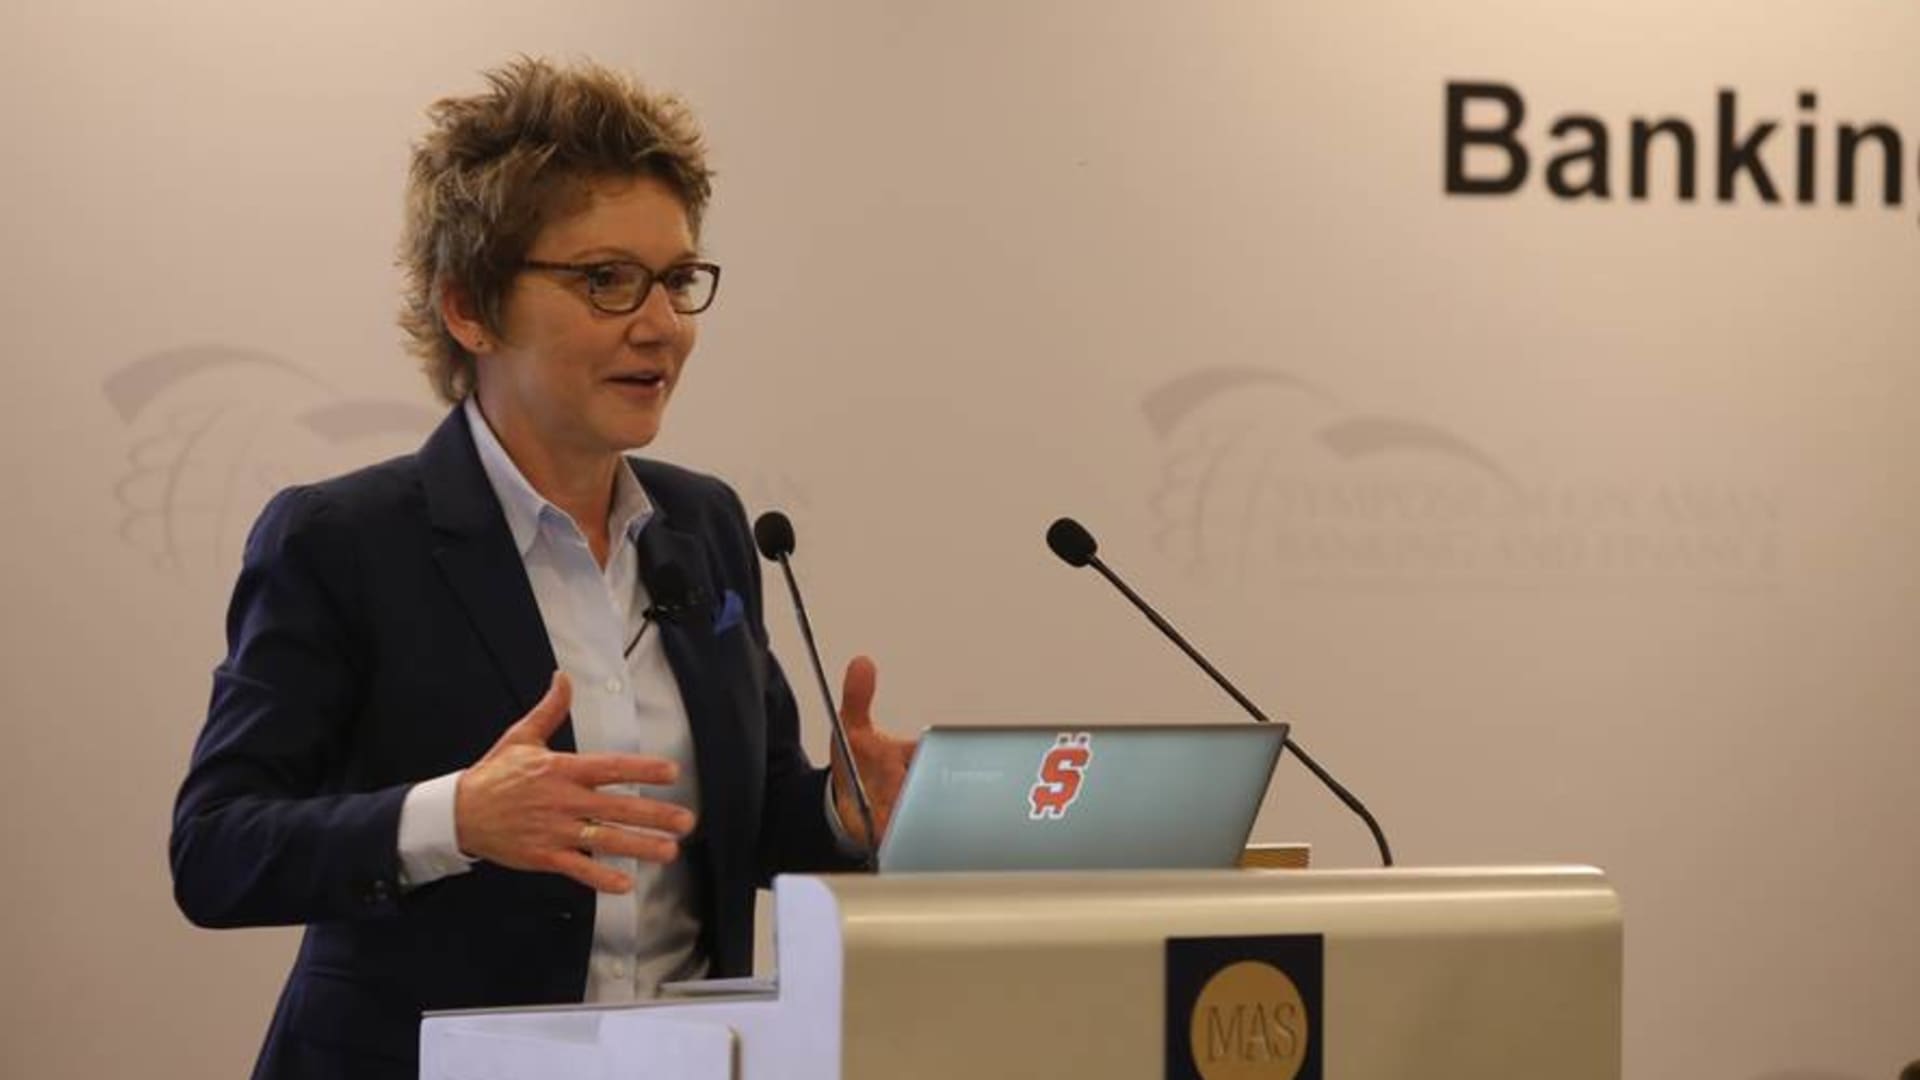 Mary Daly, president and CEO of the Federal Reserve Bank of San Francisco, giving a speech in Singapore on June 3, 2019.